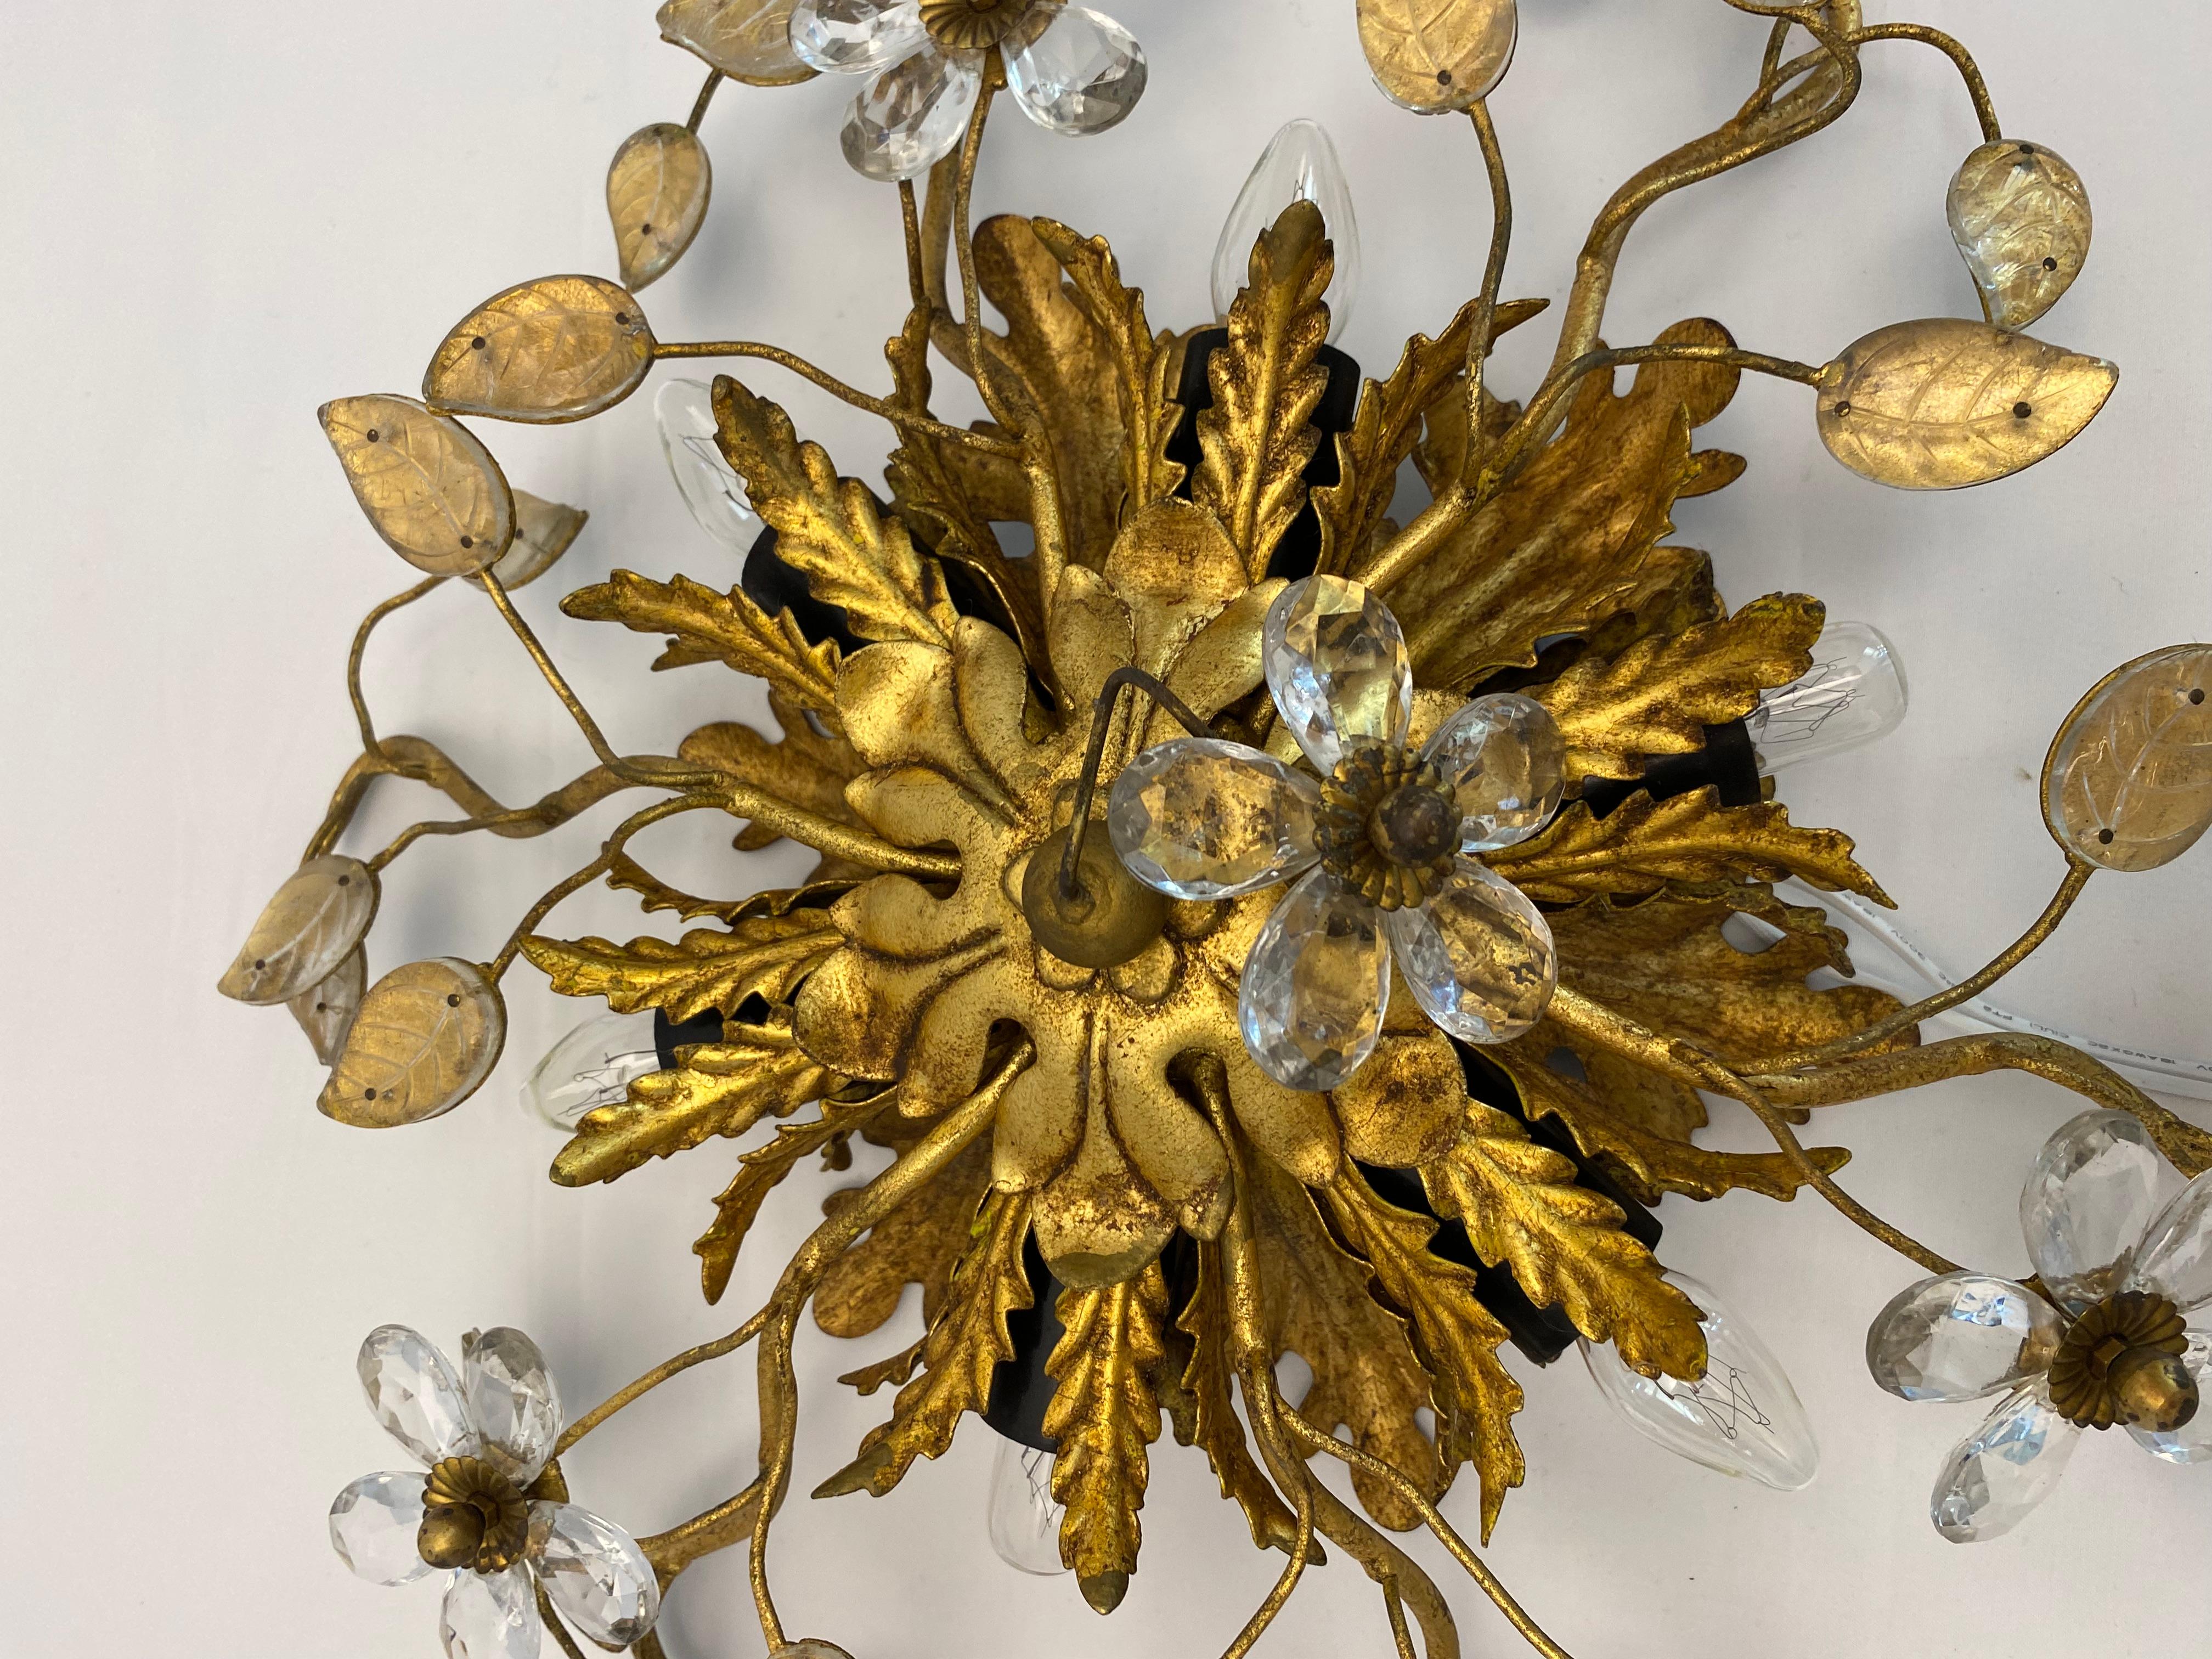 Iconic wall sconce manufactured by Maison Jansen, design attributed to Hans Kogl.  This Gilt Iron Ornate Wall Light or Ceiling Light Fixture possesses and outstanding design.  Hand-hammered gilt iron ornate details, brass and crystal floral shaped